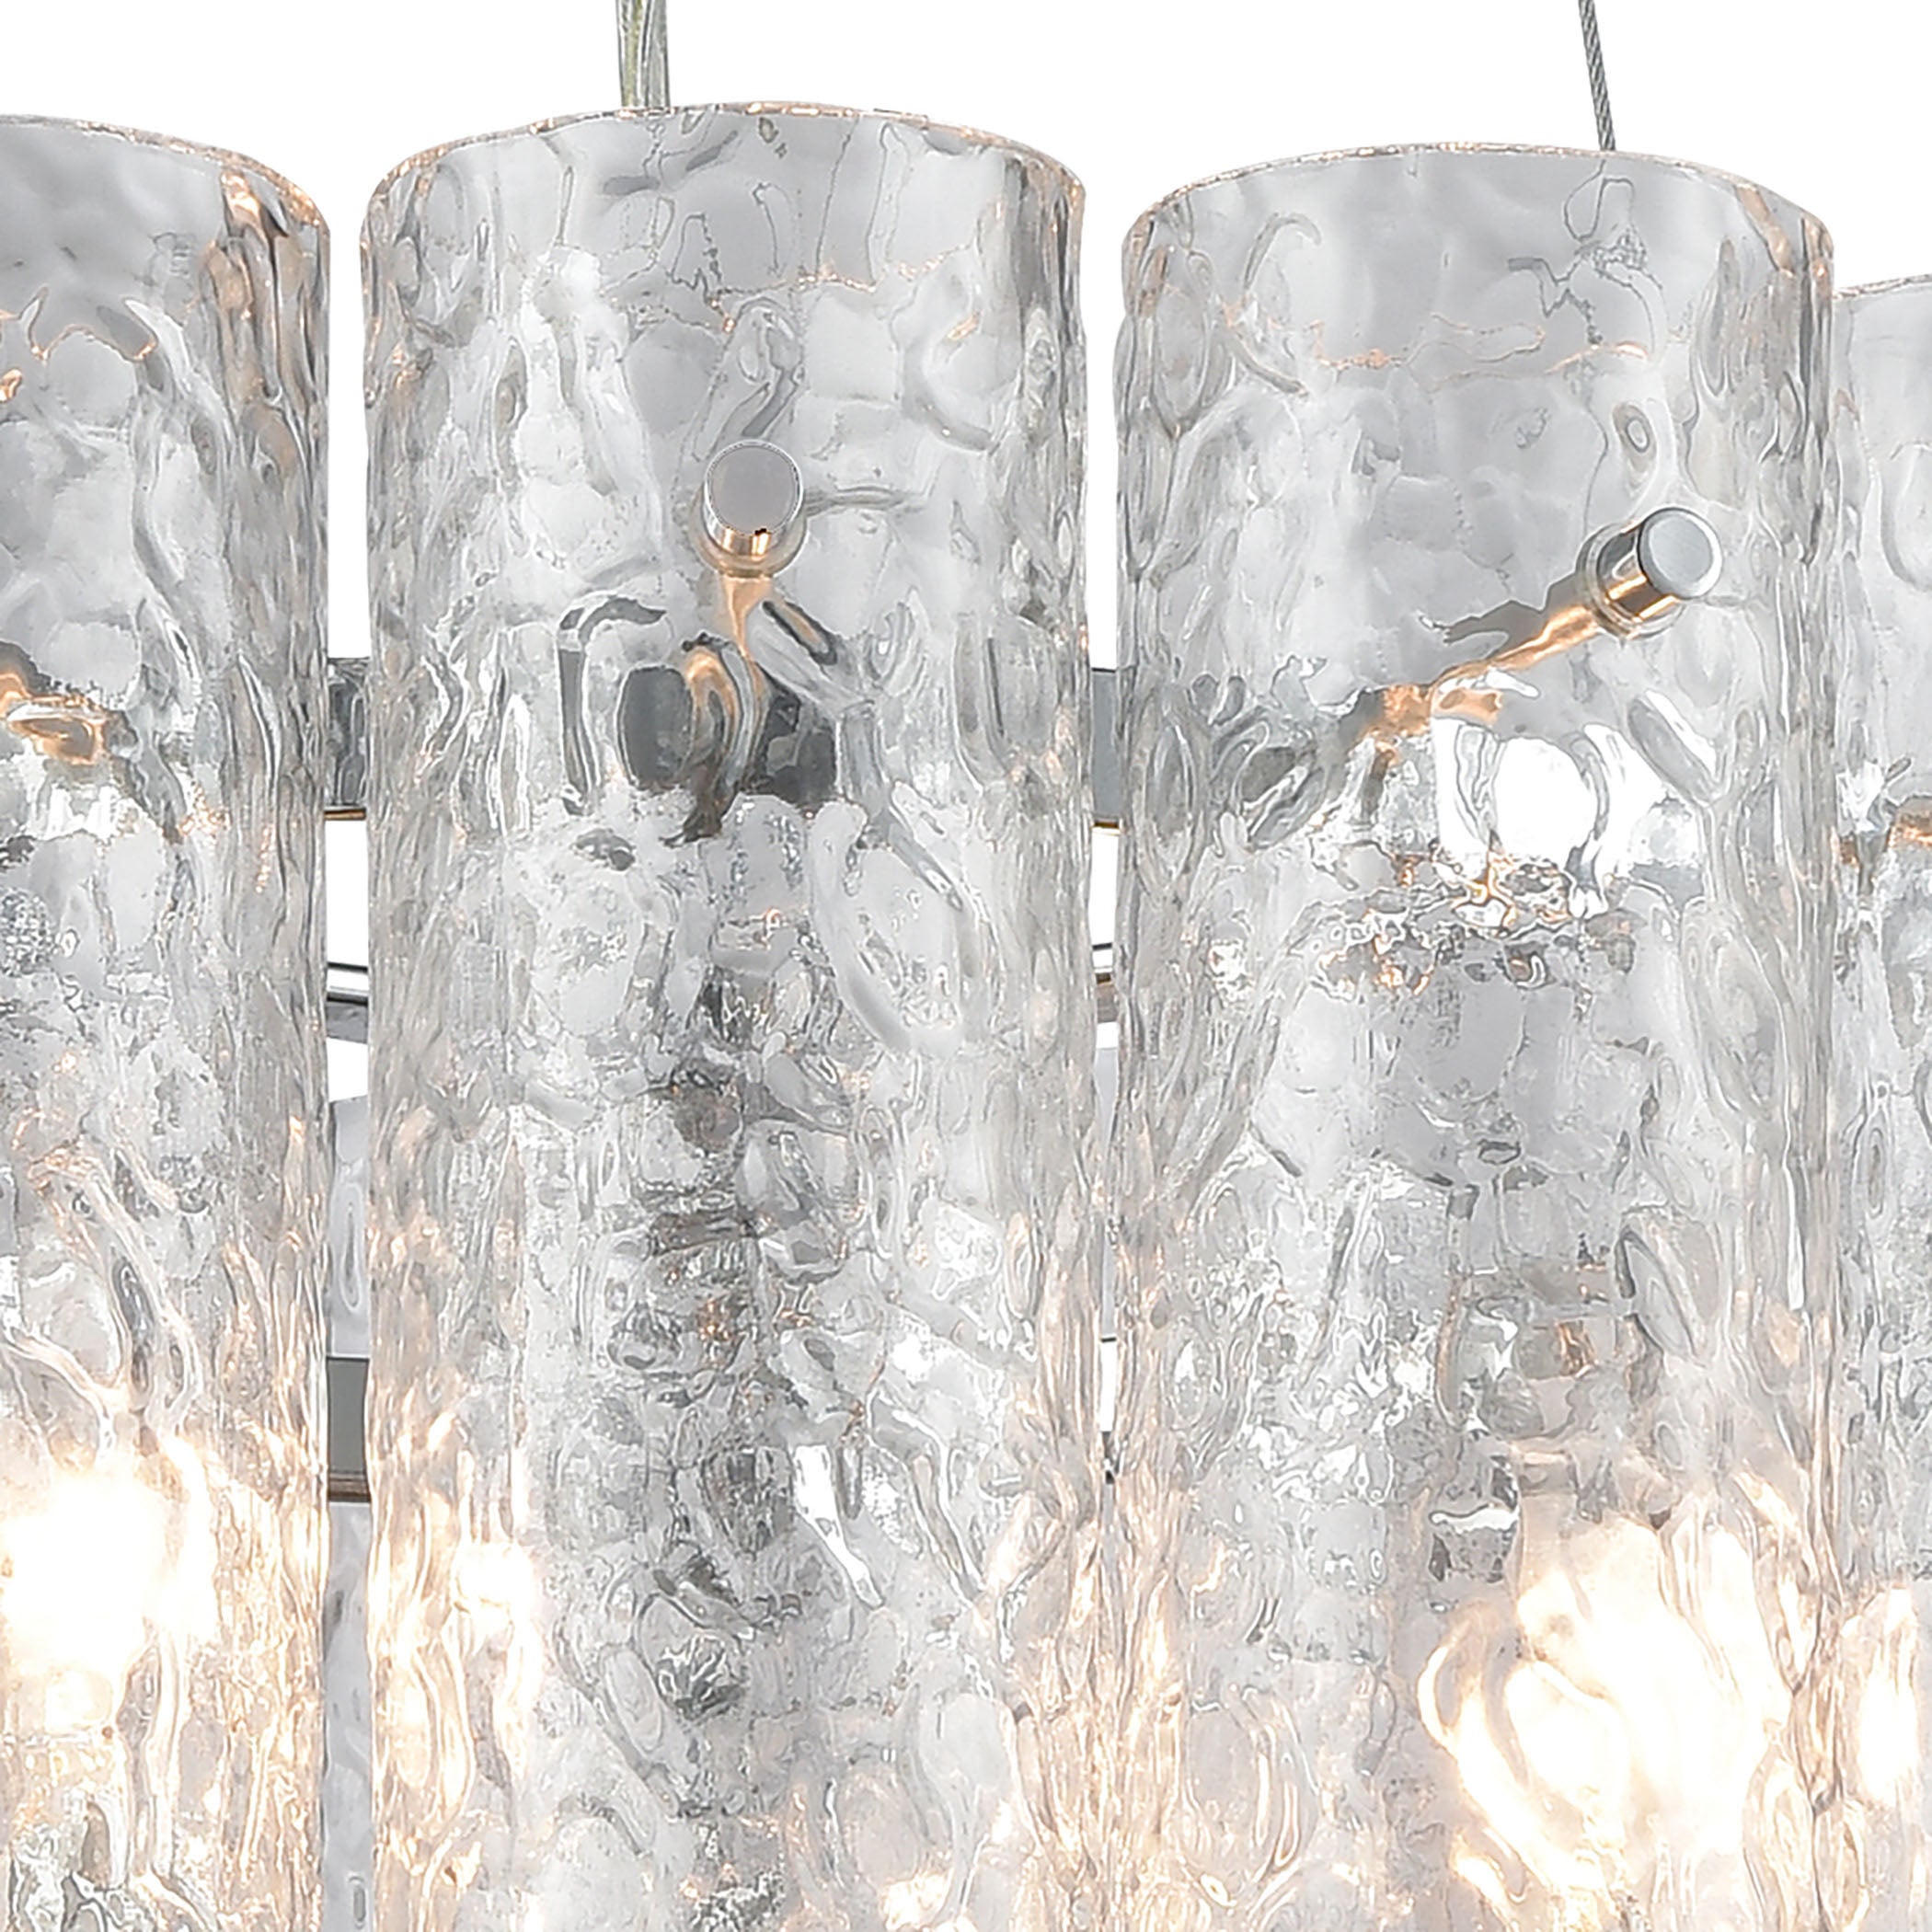 ELK Lighting 11912/4 Glass Symphony 4-Light Chandelier in Polished Chrome with Clear Textured Glass Cylinders